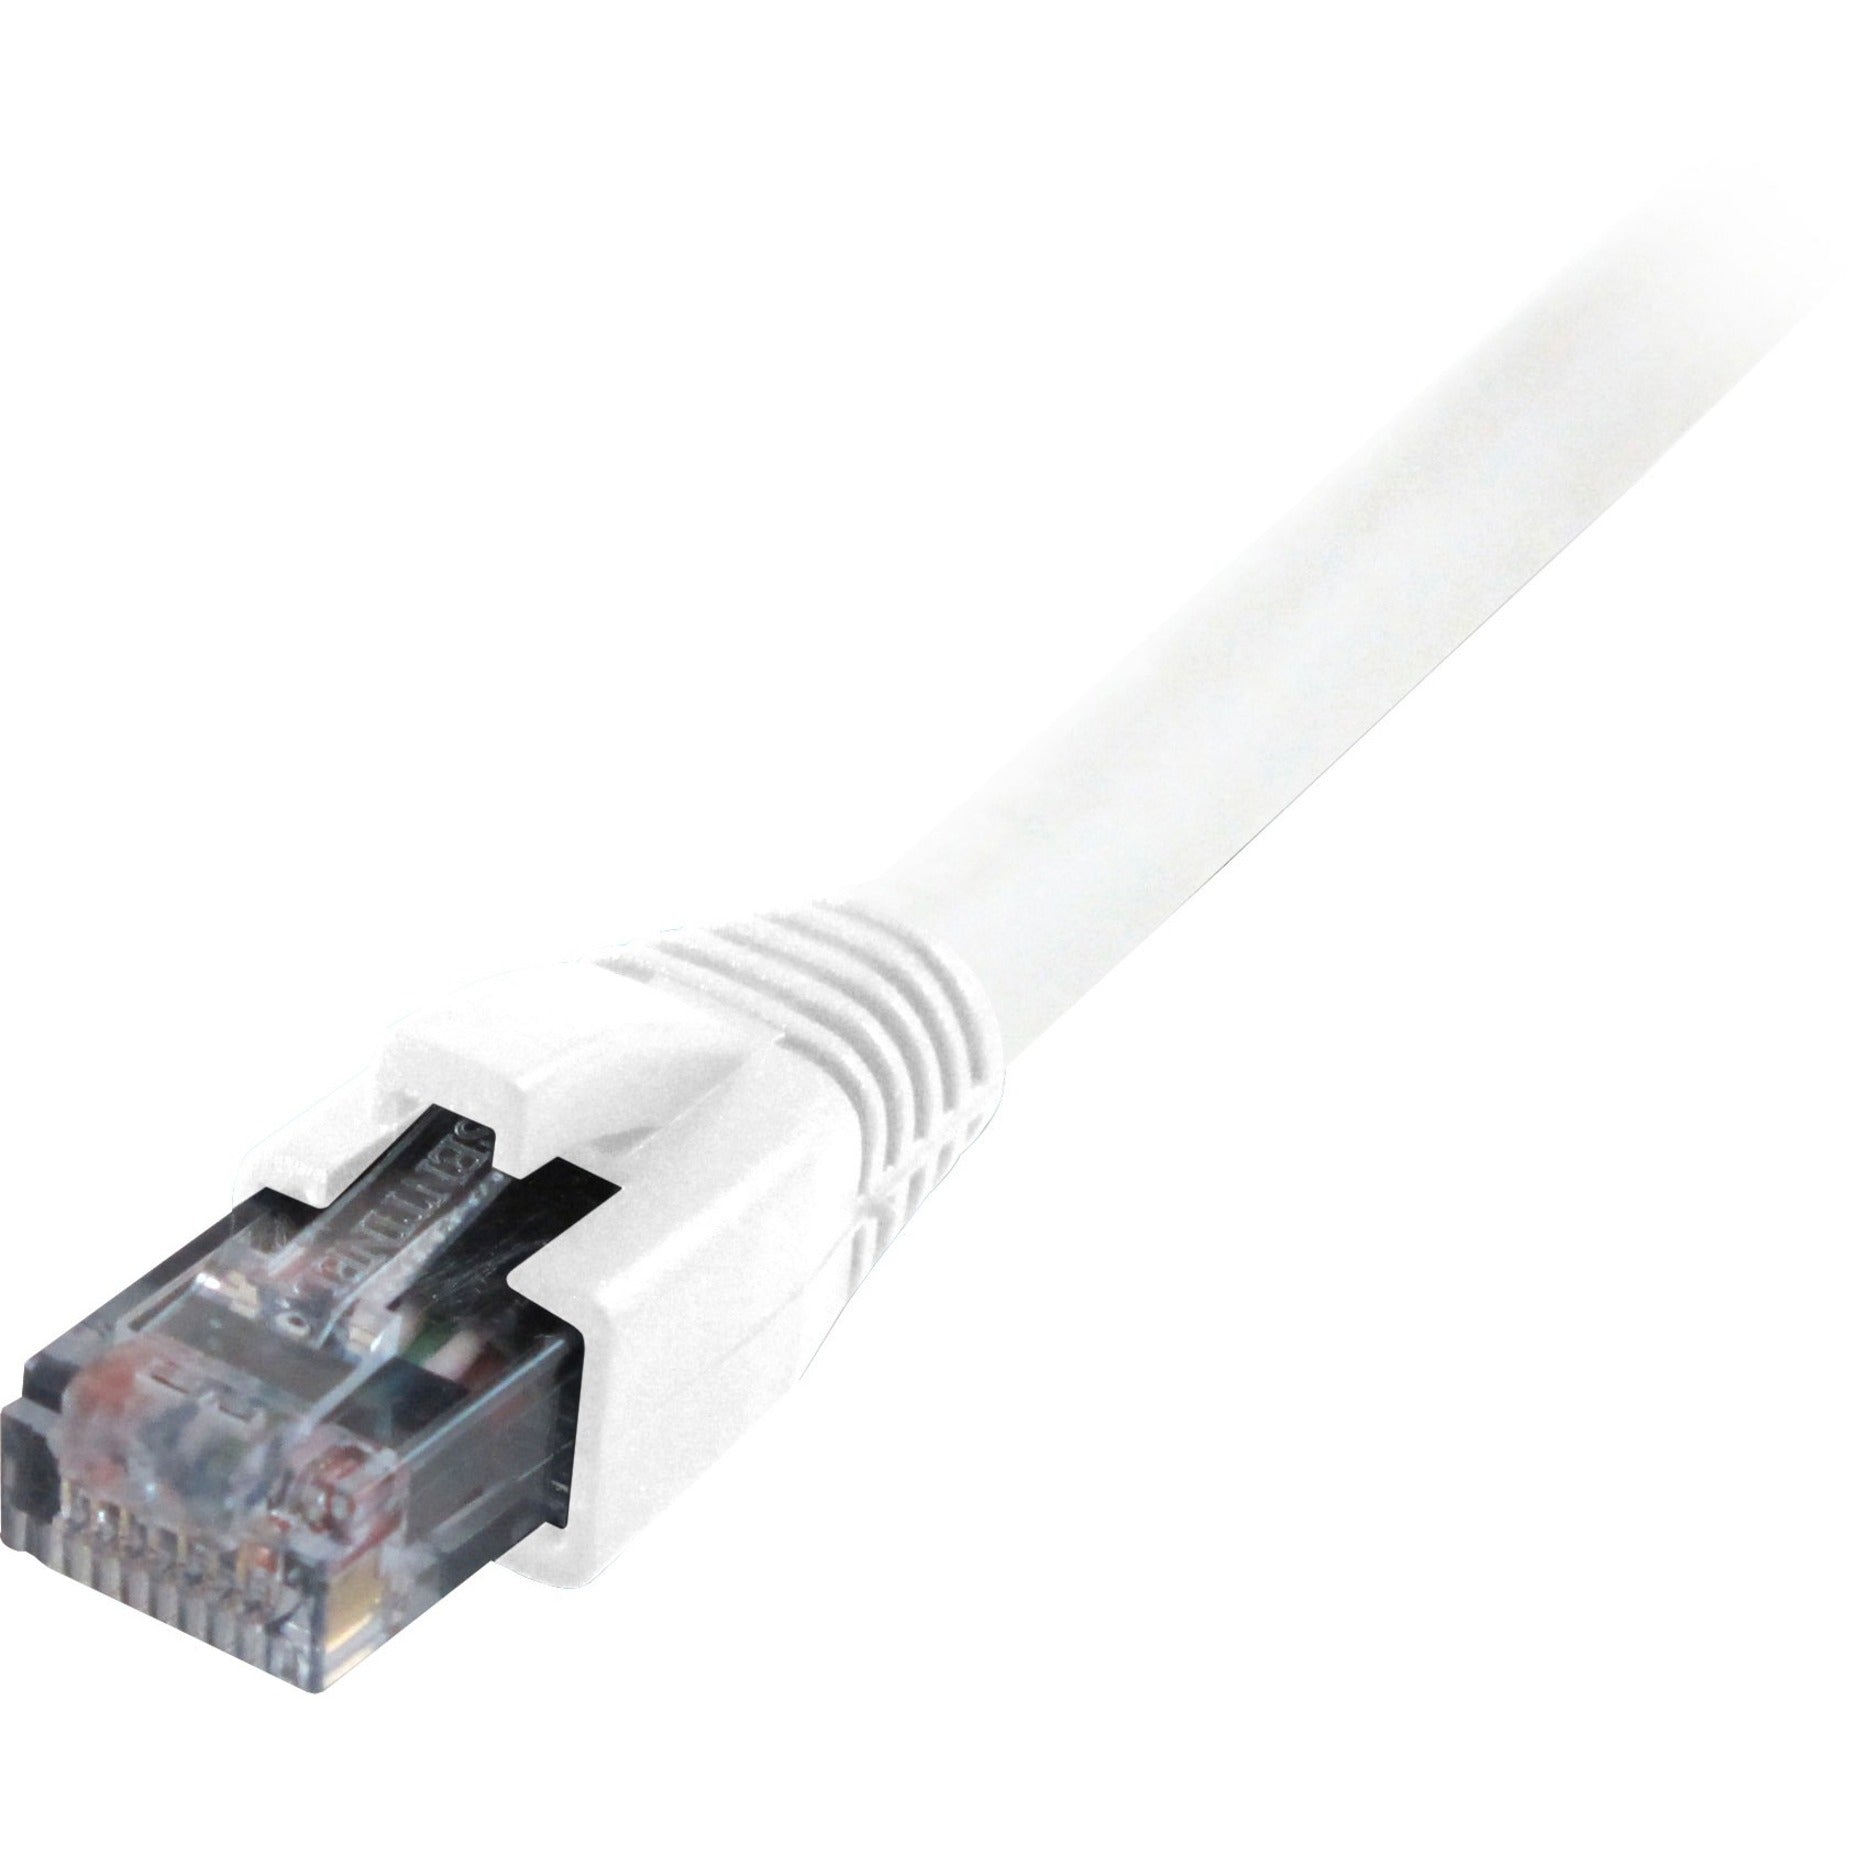 Comprehensive CAT6-14WHT Cat6 550 Mhz Snagless Patch Cable 14ft White, Stranded, Molded, 1 Gbit/s Data Transfer Rate